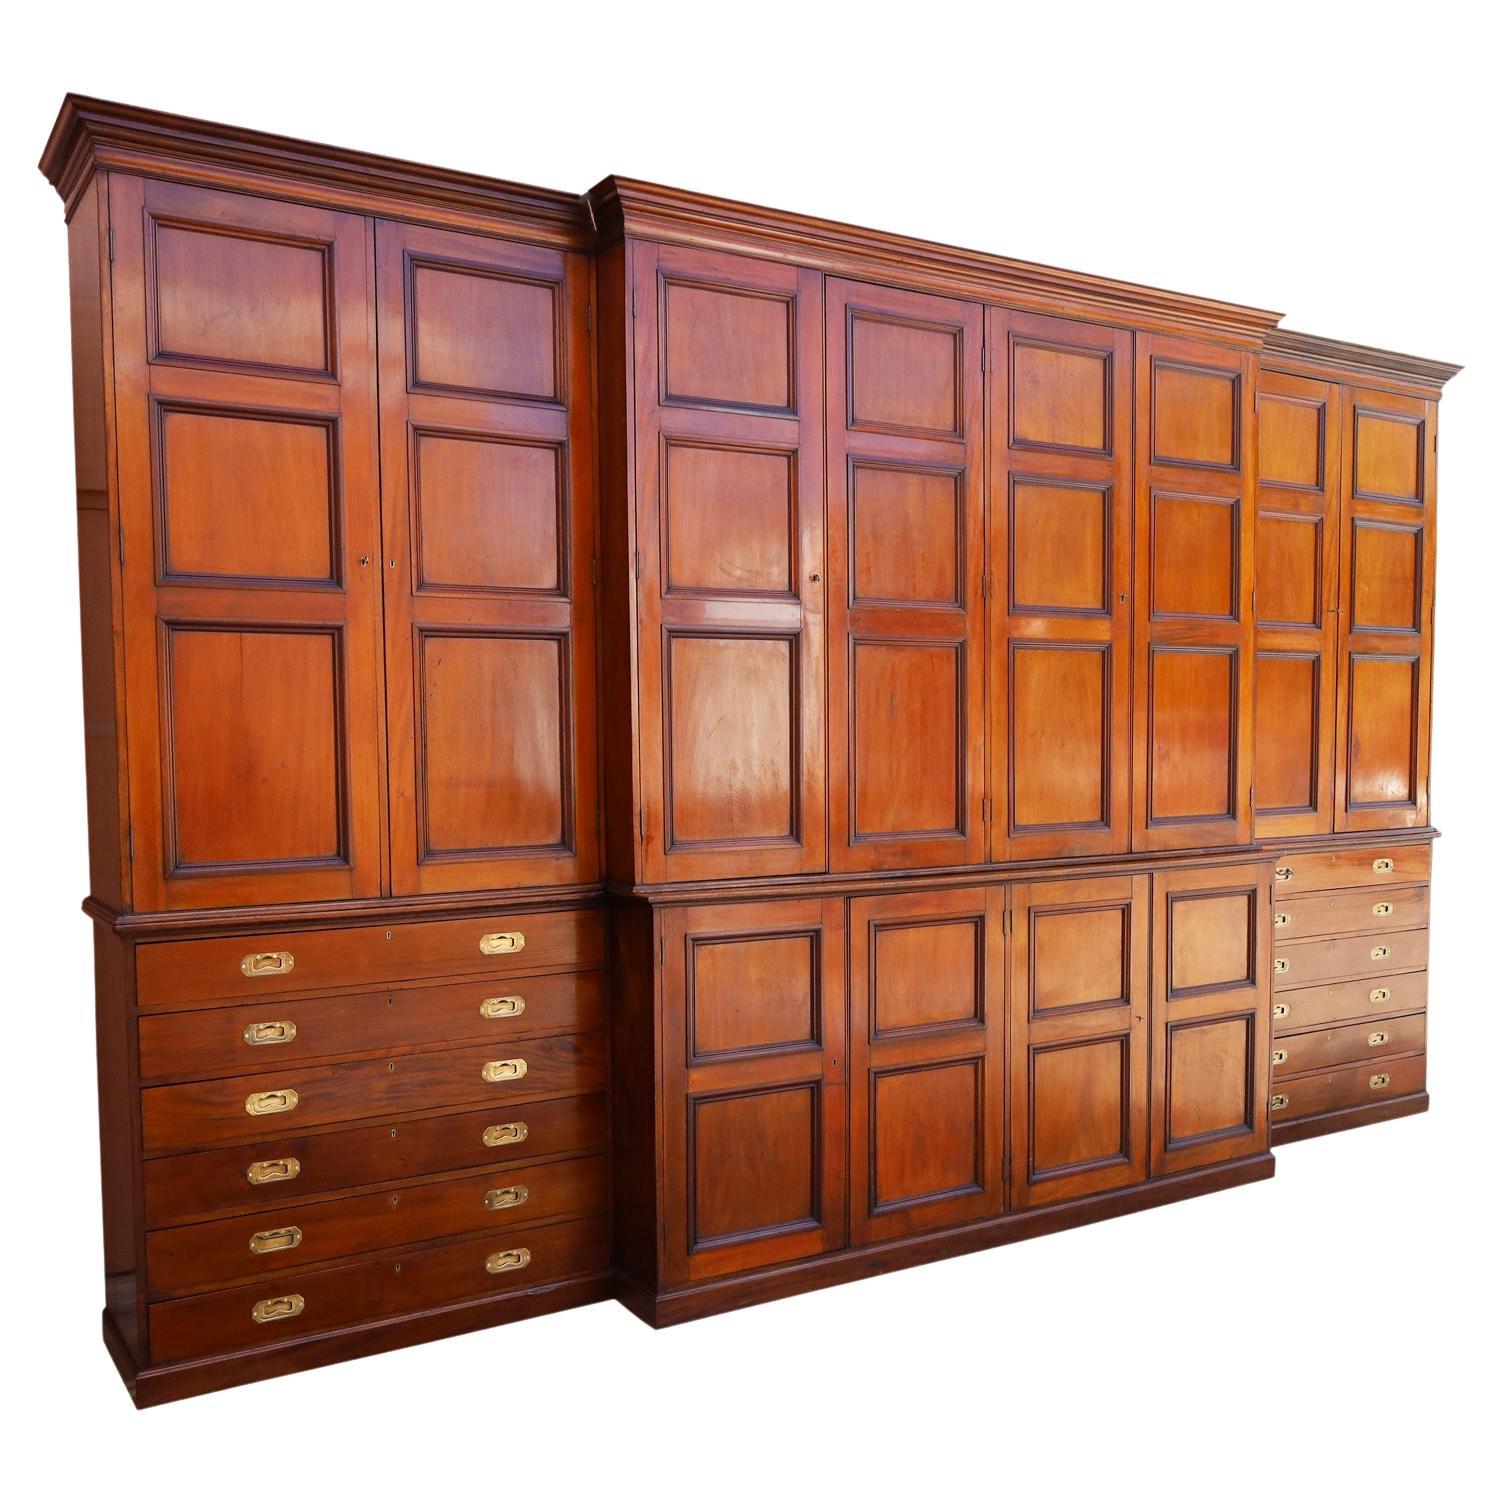 Large and luxurious 19th century English cabinet, wall unit crafted in mahogany with an architecturally significant design, featuring cornices, paneled doors, campaign brass hardware and a block foot. The spacious inside has adjustable pine shelves